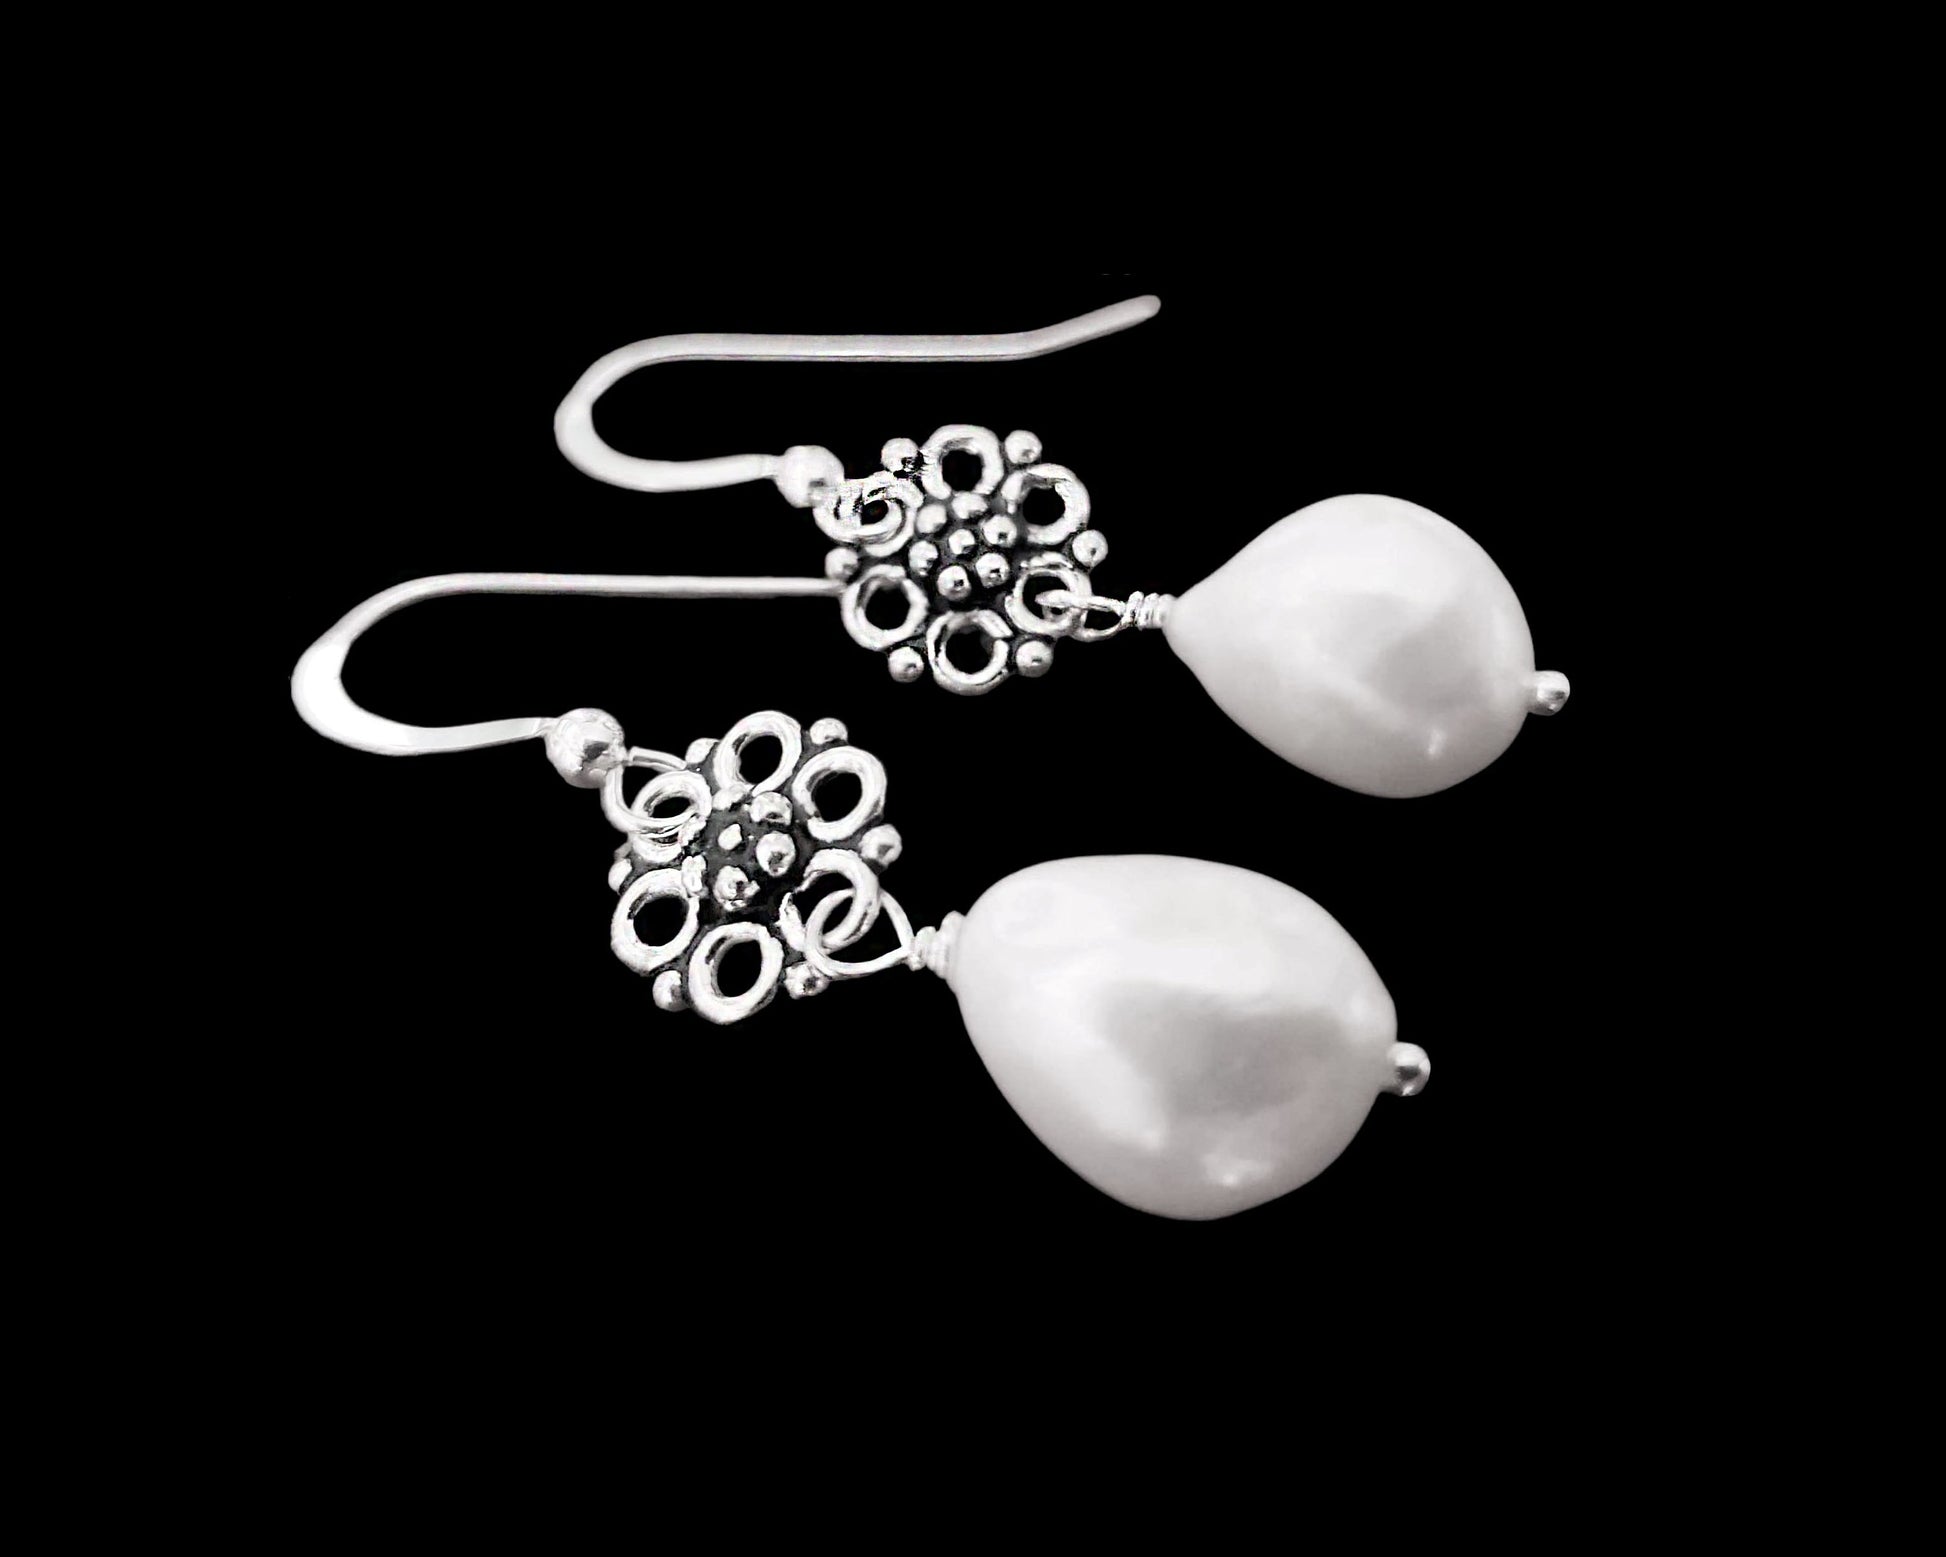 Large White Baroque Pearl Earrings wire wrapped to two decorative, antiqued Sterling Silver floral design pendants.